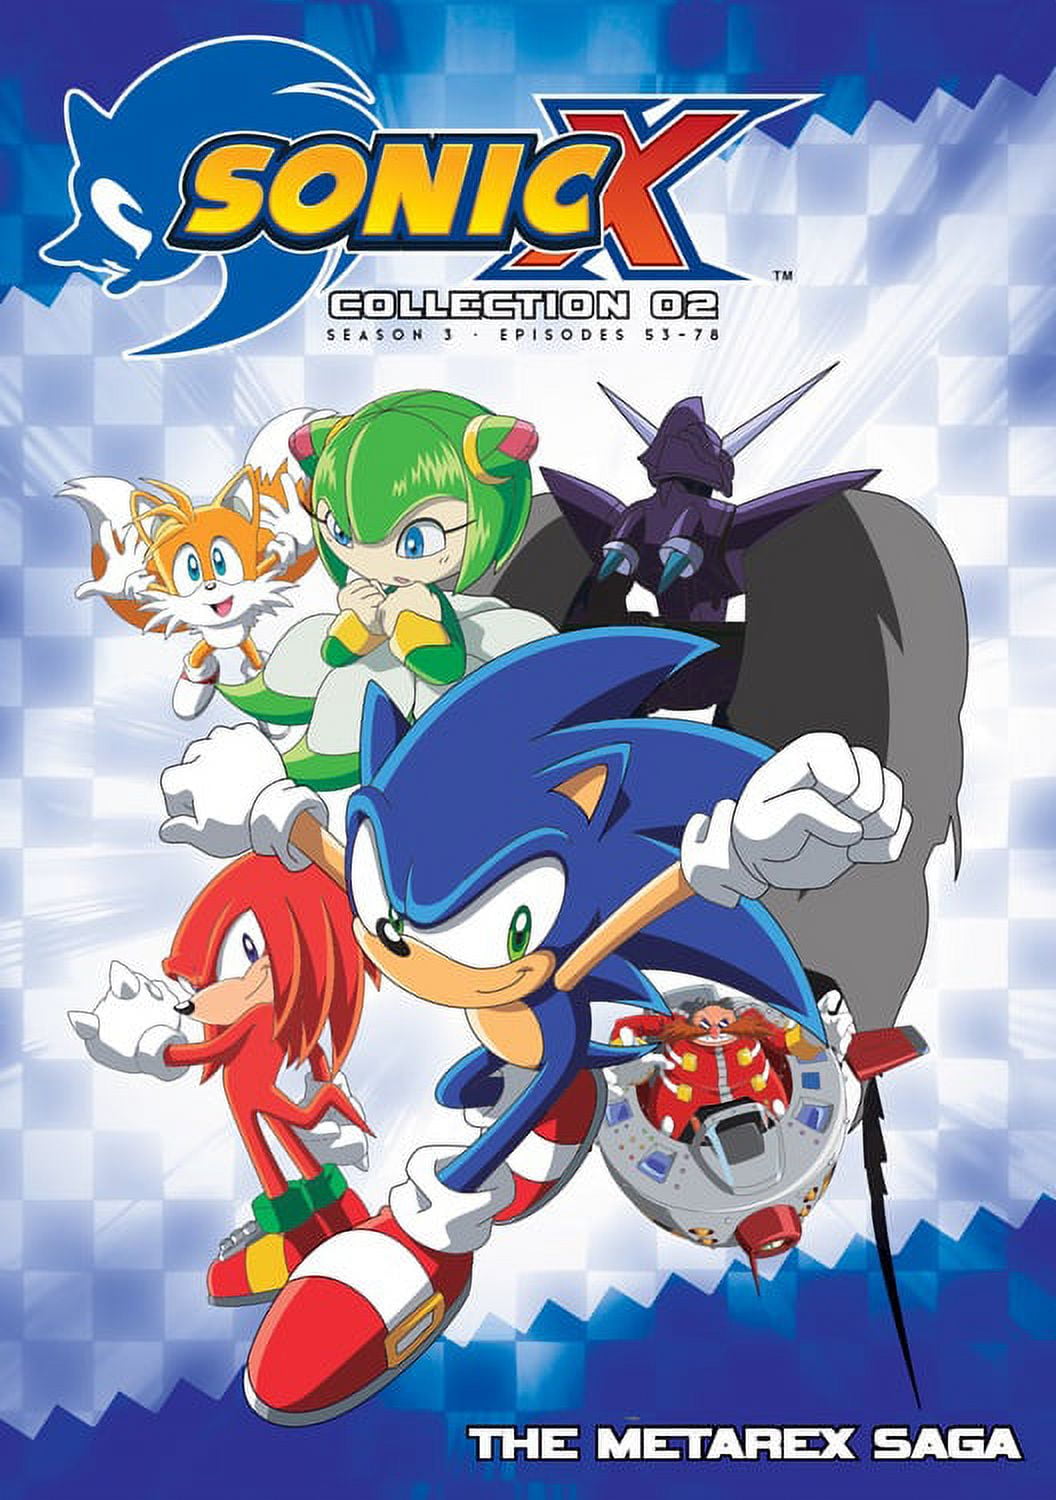 Sonic the Hedgehog 2 Movie Collection (Sonic the Hedgehog / Sonic the  Hedgehog 2) (DVD) (Walmart Exclusive)